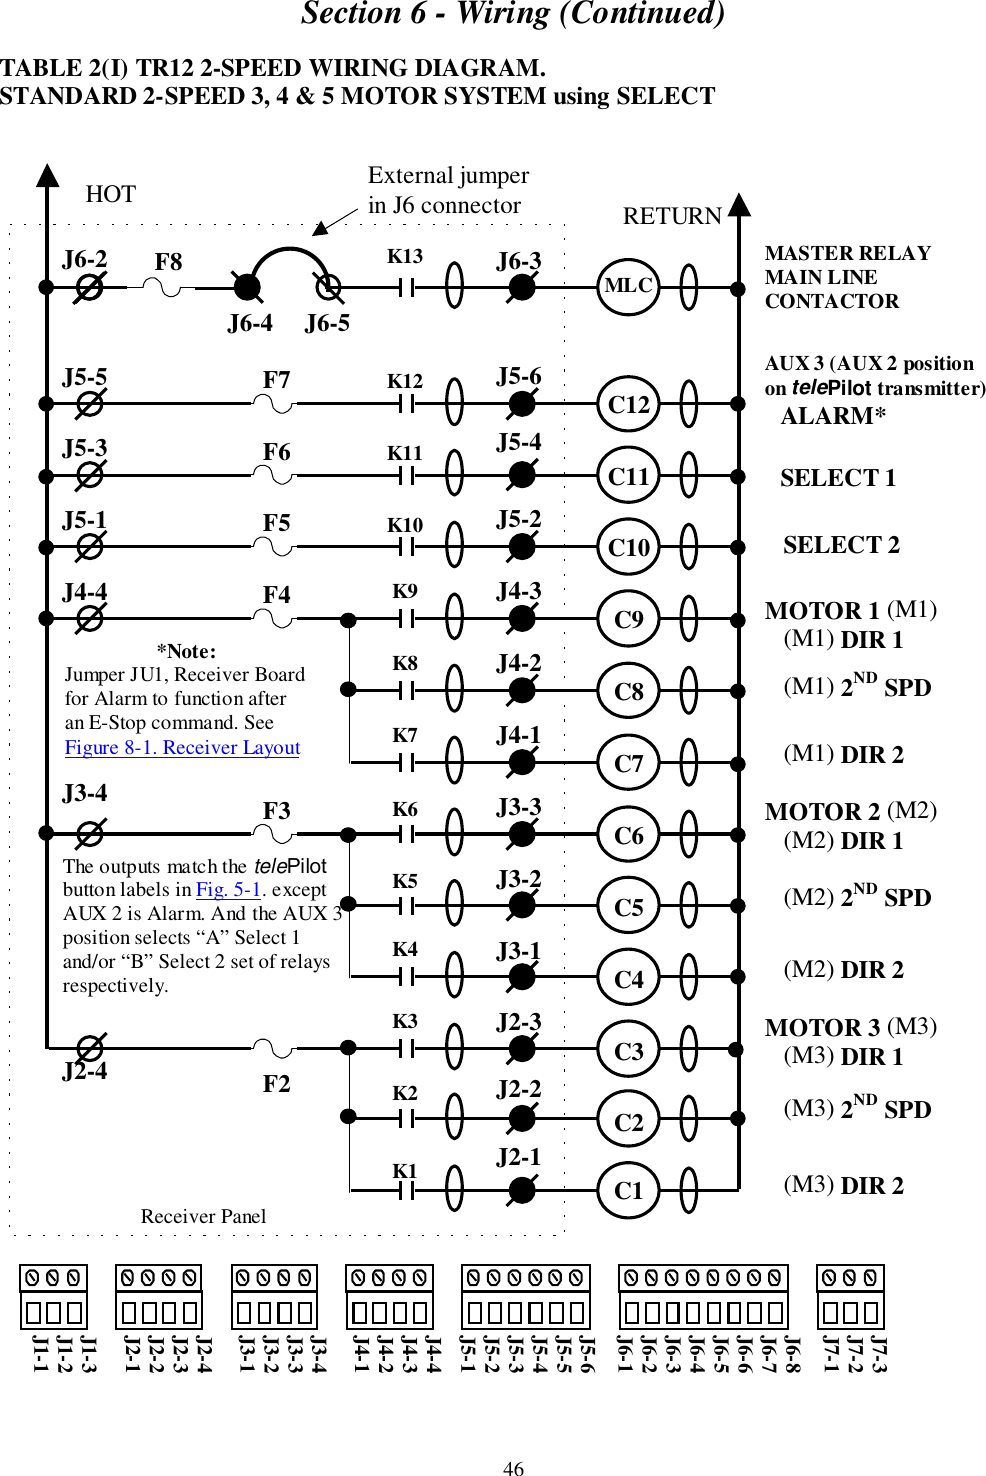 Section 6 - Wiring (Continued)46TABLE 2(I) TR12 2-SPEED WIRING DIAGRAM.STANDARD 2-SPEED 3, 4 &amp; 5 MOTOR SYSTEM using SELECTMASTER RELAYMAIN LINECONTACTORAUX 3 (AUX 2 positionon telePilot transmitter)   ALARM*   SELECT 1              SELECT 2MOTOR 1 (M1)   (M1) DIR 1   (M1) 2ND SPD   (M1) DIR 2MOTOR 2 (M2)   (M2) DIR 1   (M2) 2ND SPD   (M2) DIR 2MOTOR 3 (M3)   (M3) DIR 1   (M3) 2ND SPD   (M3) DIR 2     Receiver PanelJ6-2J5-5J5-3J5-1J4-4J3-4J2-4J6-3J5-6J5-4J5-2J4-3J4-2J4-1J3-3J3-2J3-1J2-3J2-2J2-1HOT RETURNK13K12K11K10K9K8K7K6K5K4K3K2K1MLCC12C11C10C9C8C7C6C5C4C3C2C1F7F6F5F4F3F2J7-3J7-2J7-1J6-8J6-7J6-6J6-5J6-4J6-3J6-2J6-1J5-6J5-5J5-4J5-3J5-2J5-1J4-4J4-3J4-2J4-1J3-4J3-3J3-2J3-1J2-4J2-3J2-2J2-1J1-3J1-2J1-1External jumperin J6 connectorJ6-4     J6-5F8*Note:Jumper JU1, Receiver Boardfor Alarm to function afteran E-Stop command. SeeFigure 8-1. Receiver LayoutThe outputs match the telePilotbutton labels in Fig. 5-1. exceptAUX 2 is Alarm. And the AUX 3position selects “A” Select 1and/or “B” Select 2 set of relaysrespectively.